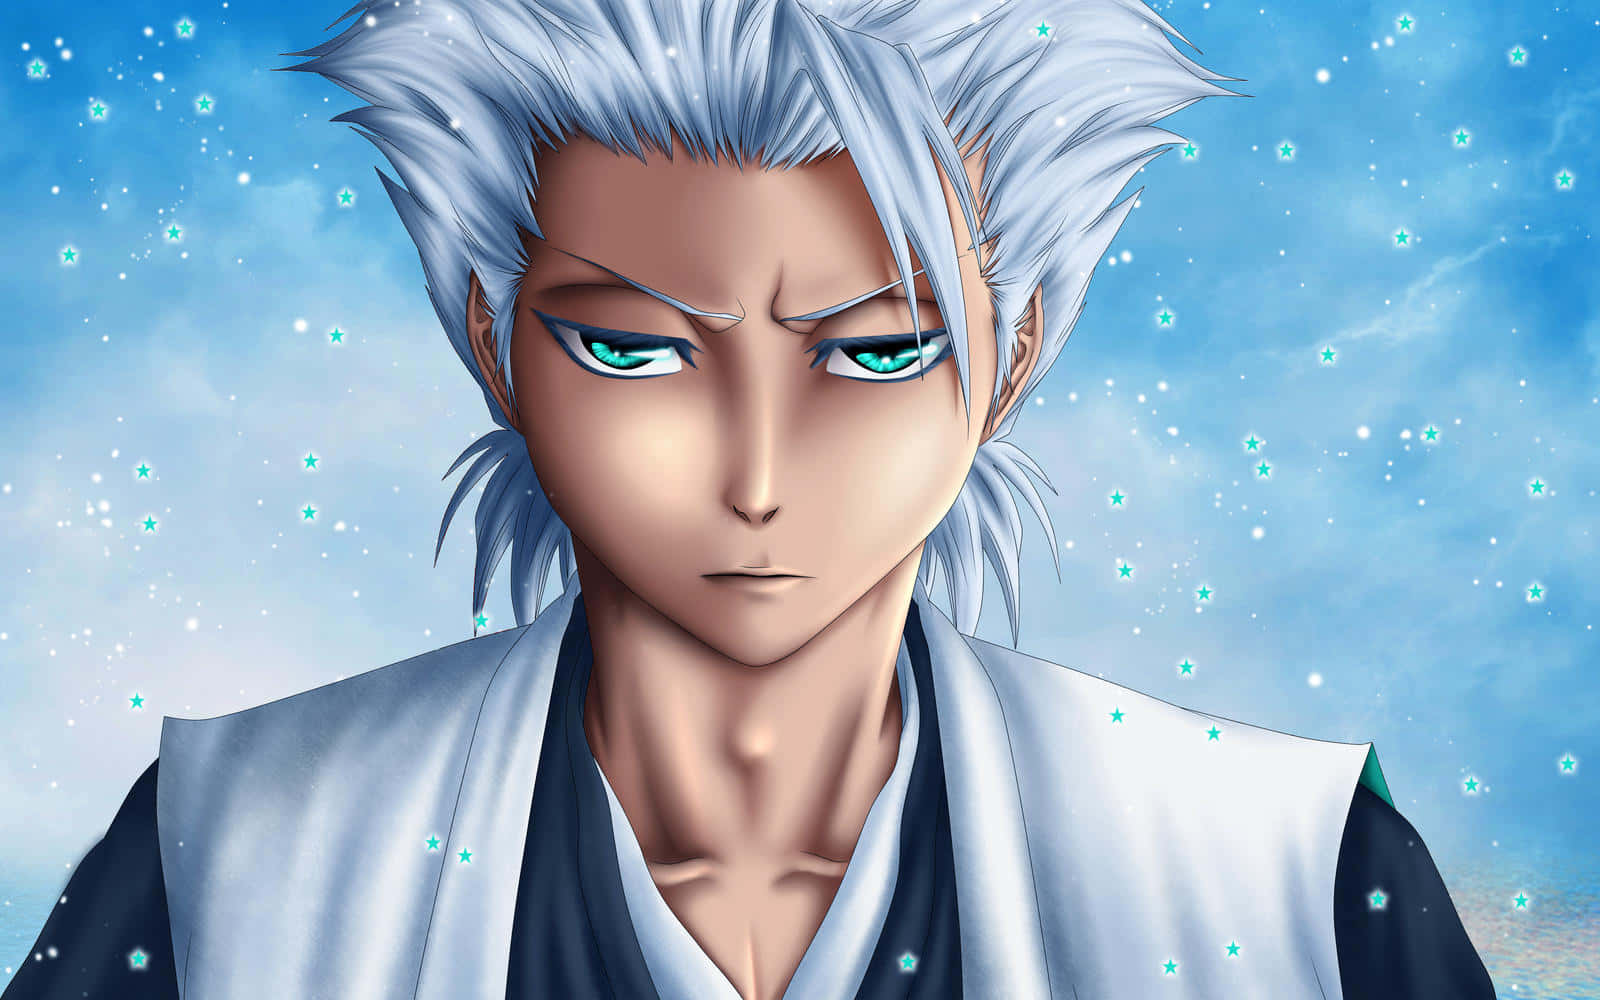 Toshiro Hitsugaya, a brave and powerful leader from the world of Bleach. Wallpaper